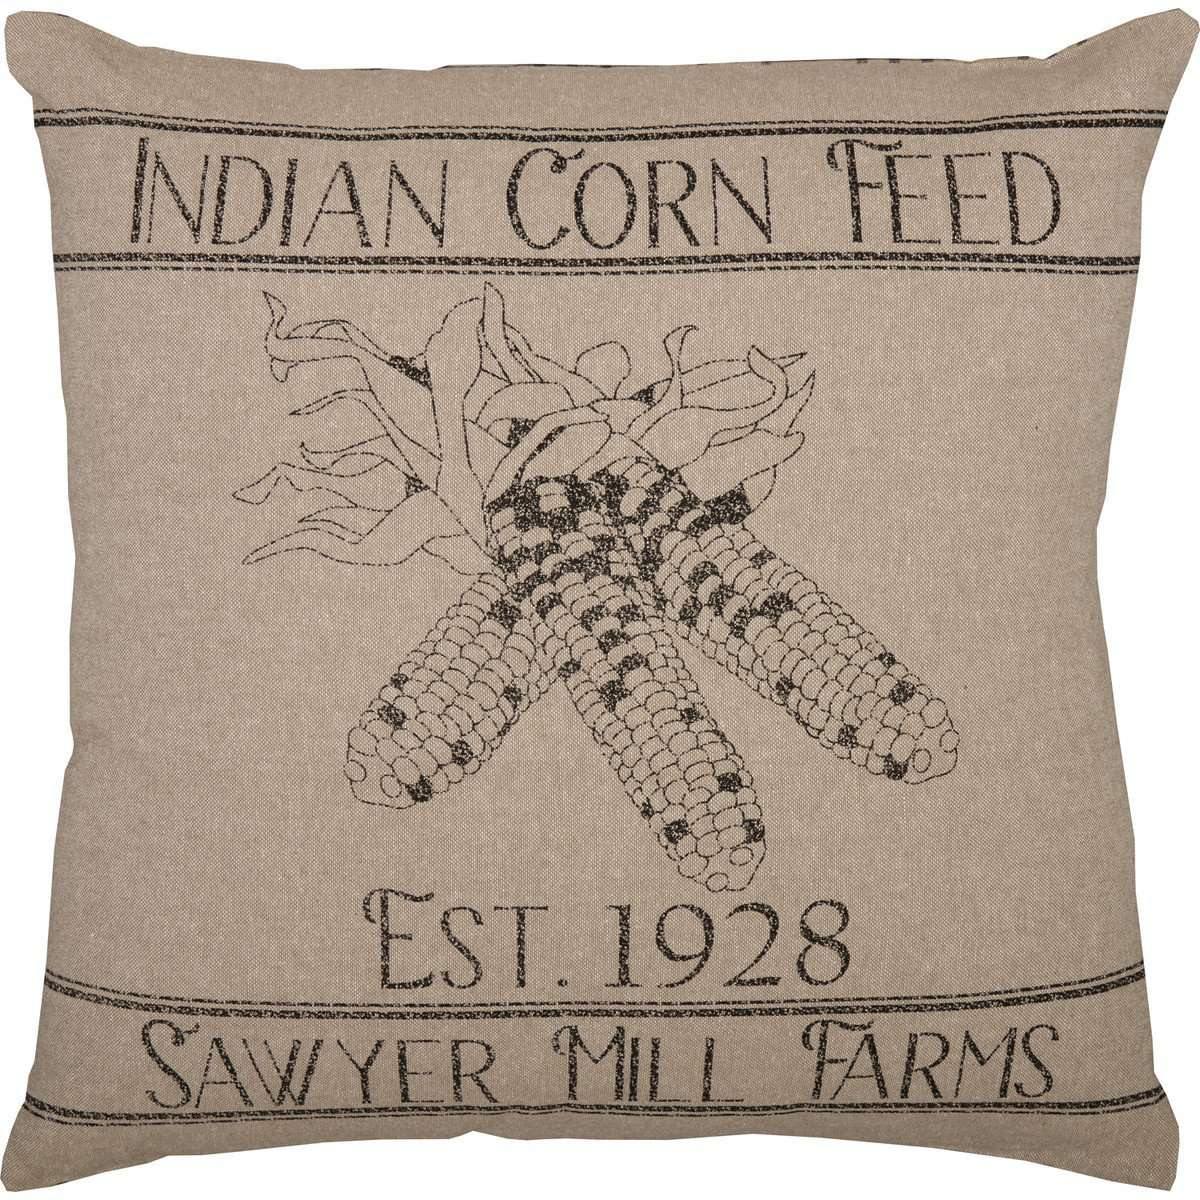 Sawyer Mill Charcoal Corn Feed Pillow 18x18 VHC Brands front